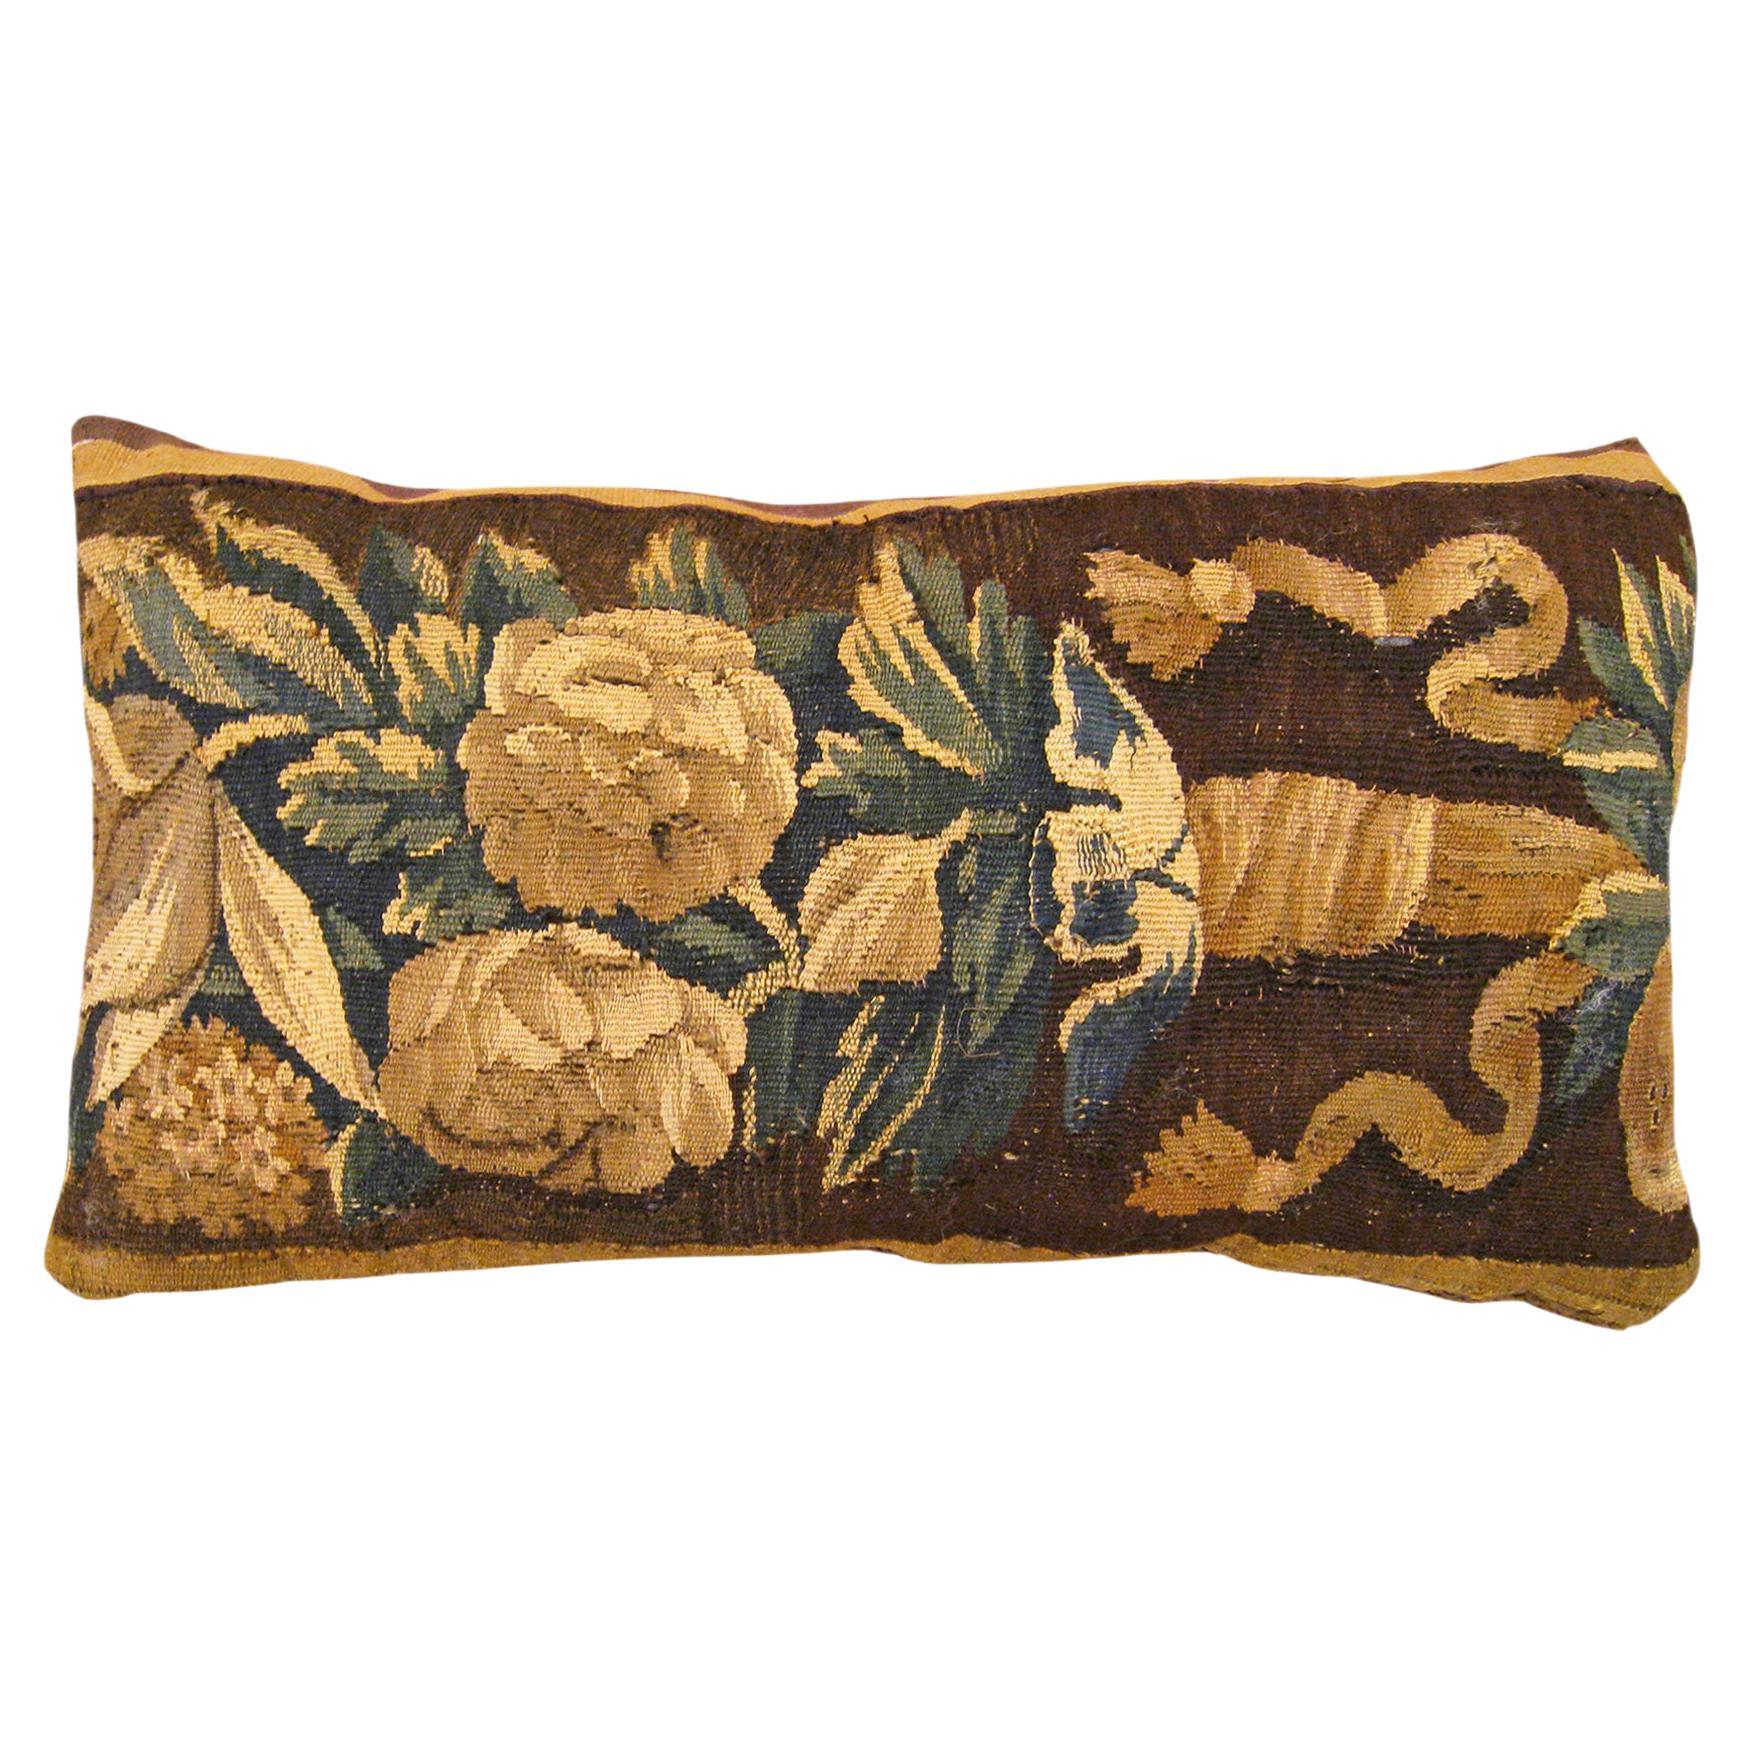 Decorative Antique 18th Century Tapestry Pillow with Floral Elements Allover For Sale